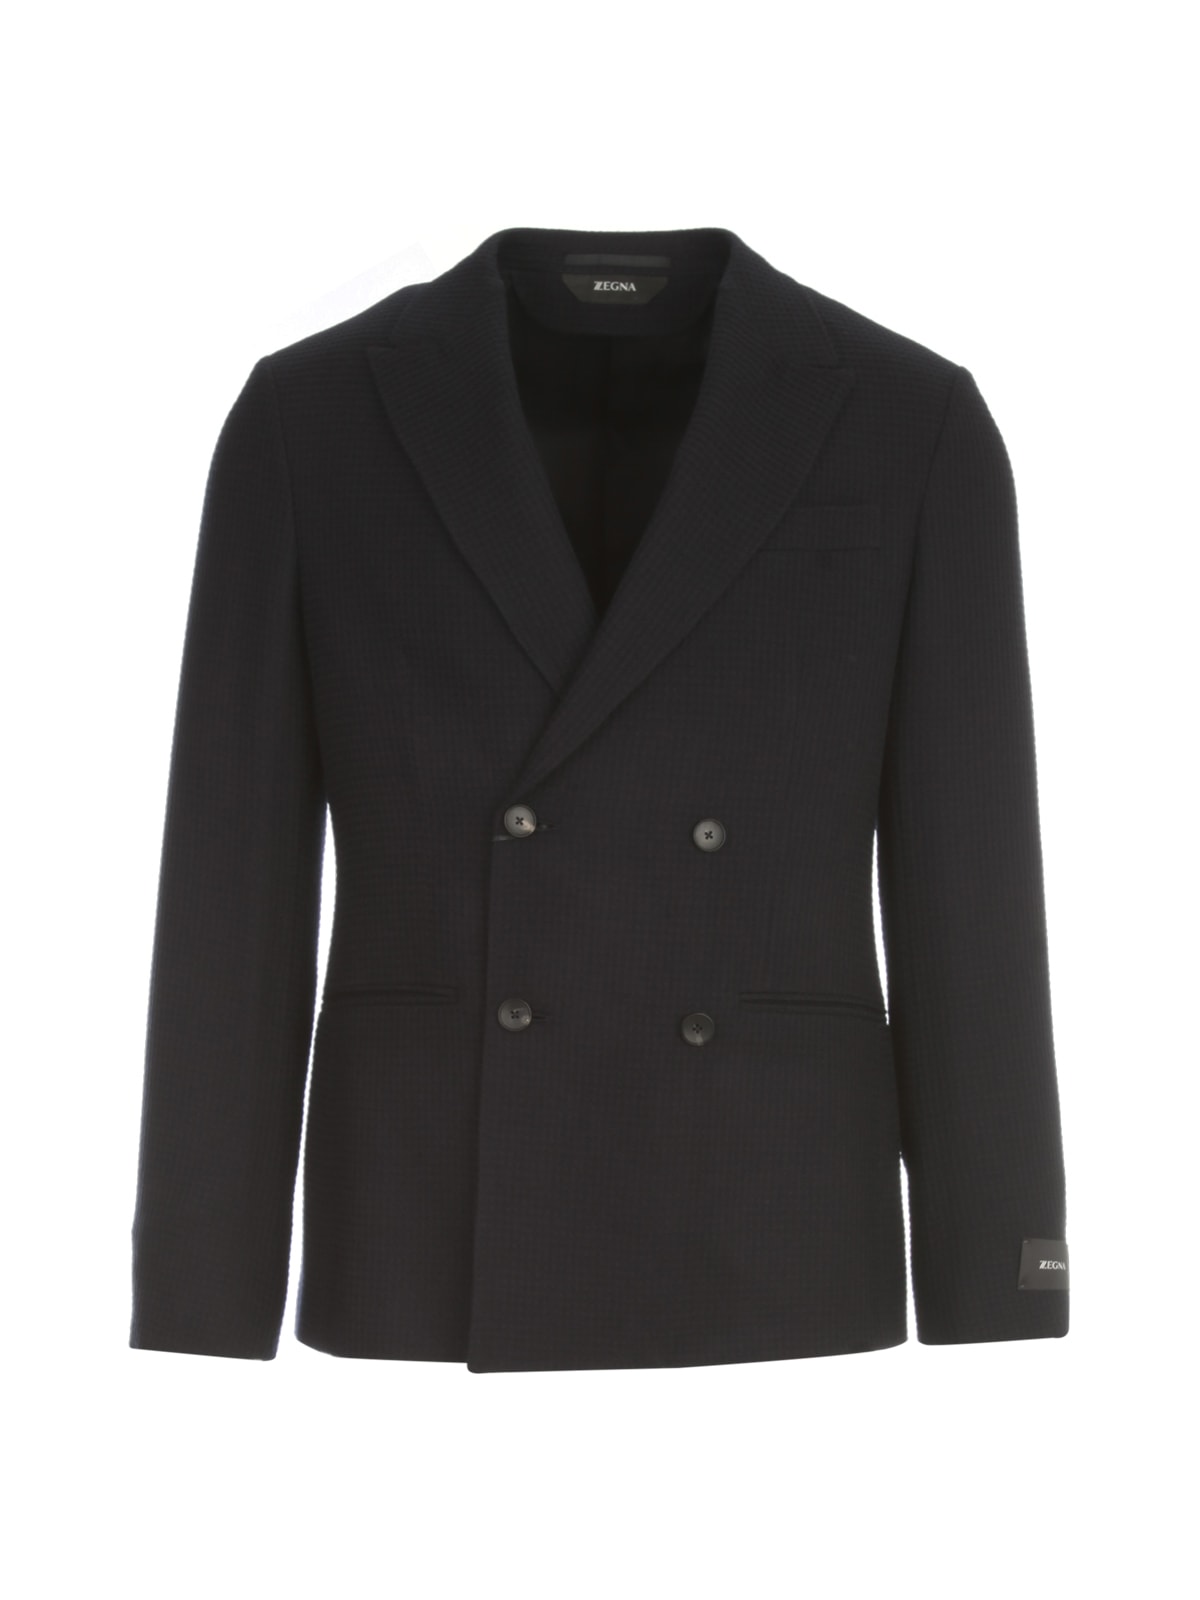 Z Zegna Pure Wool Double Breasted Jacket